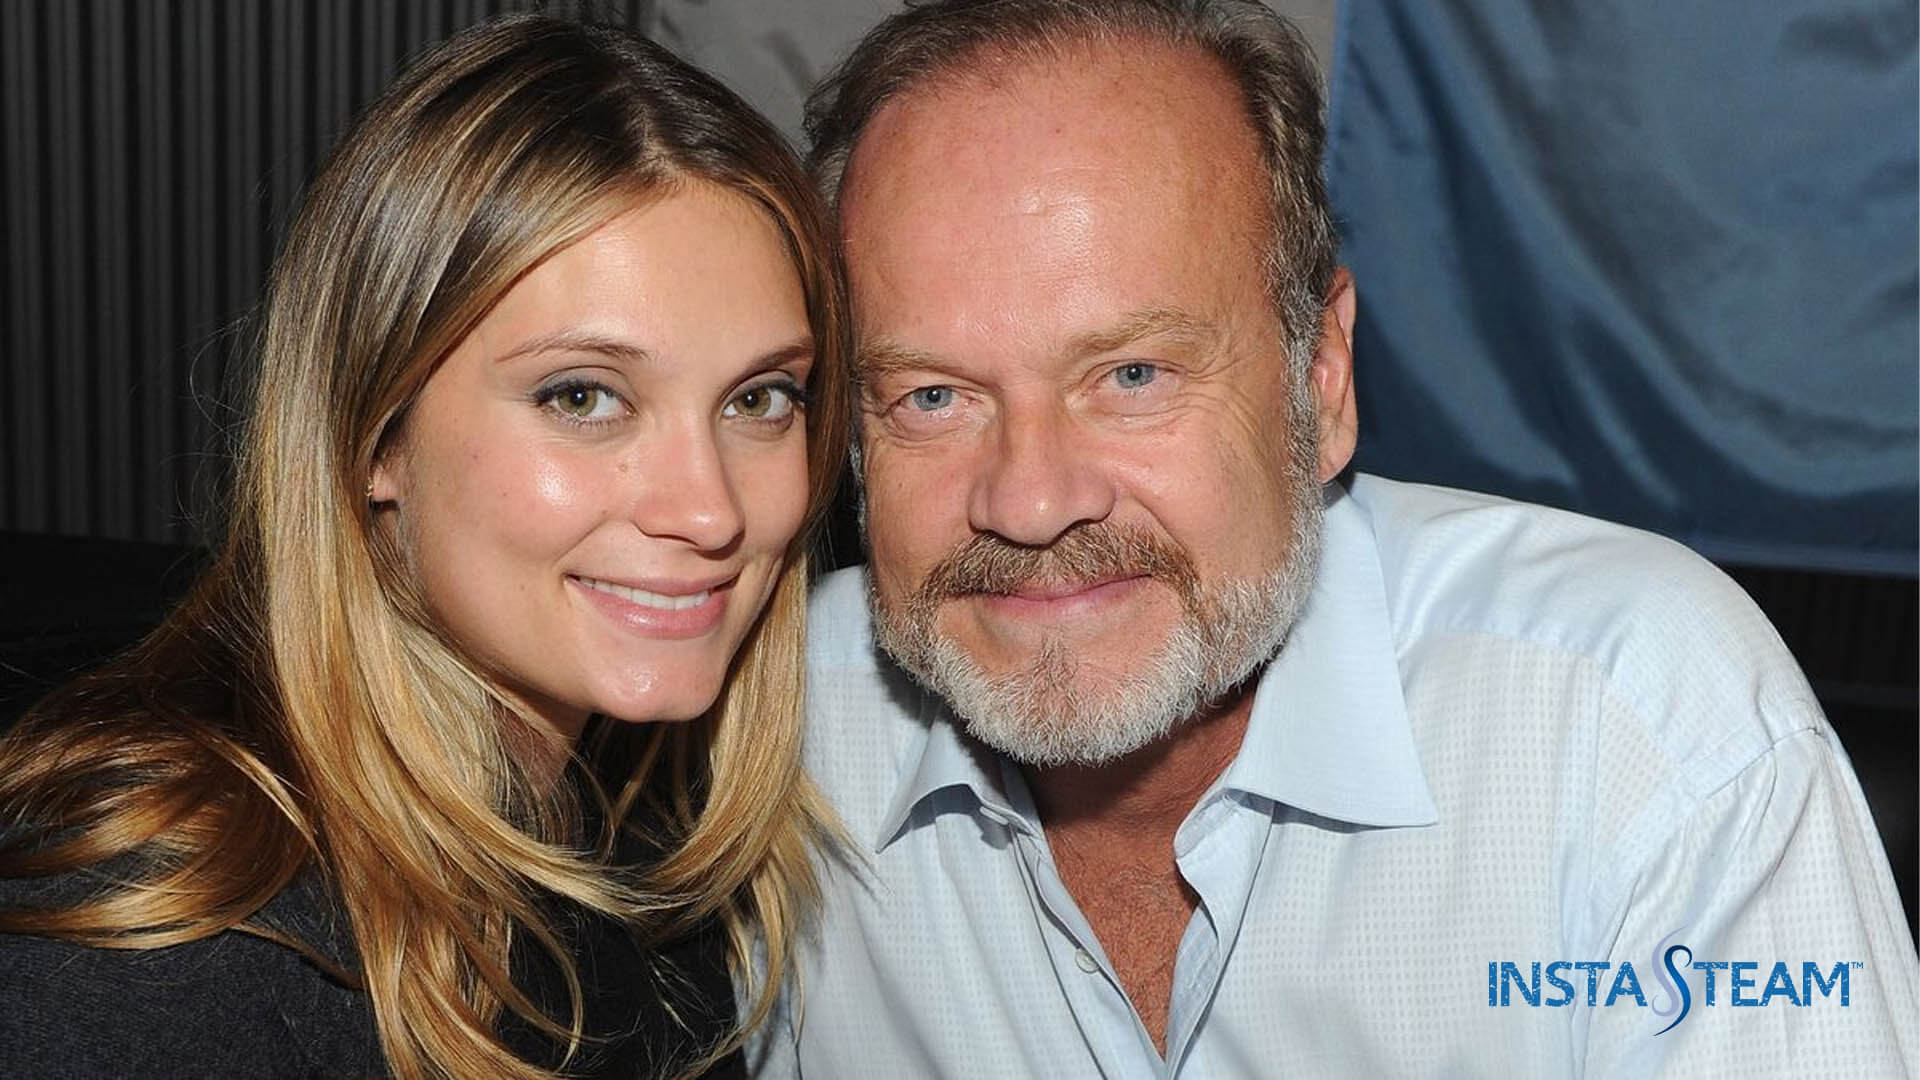 Kelsey Grammer to Narrate History Series on Fox Business Network